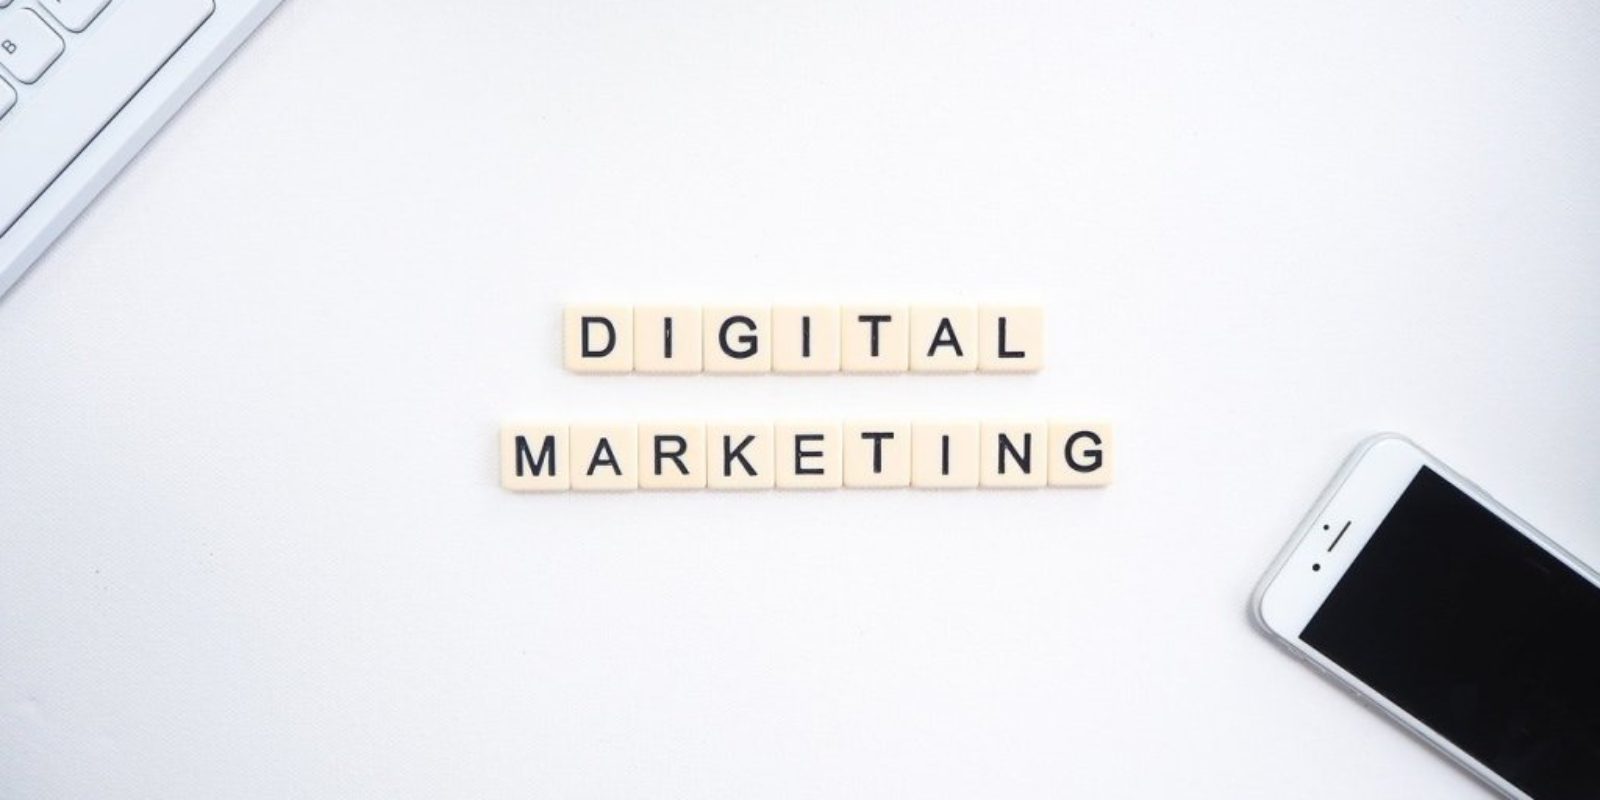 Digital Marketing Tips to Help your Business Adapt to Today’s Crisis